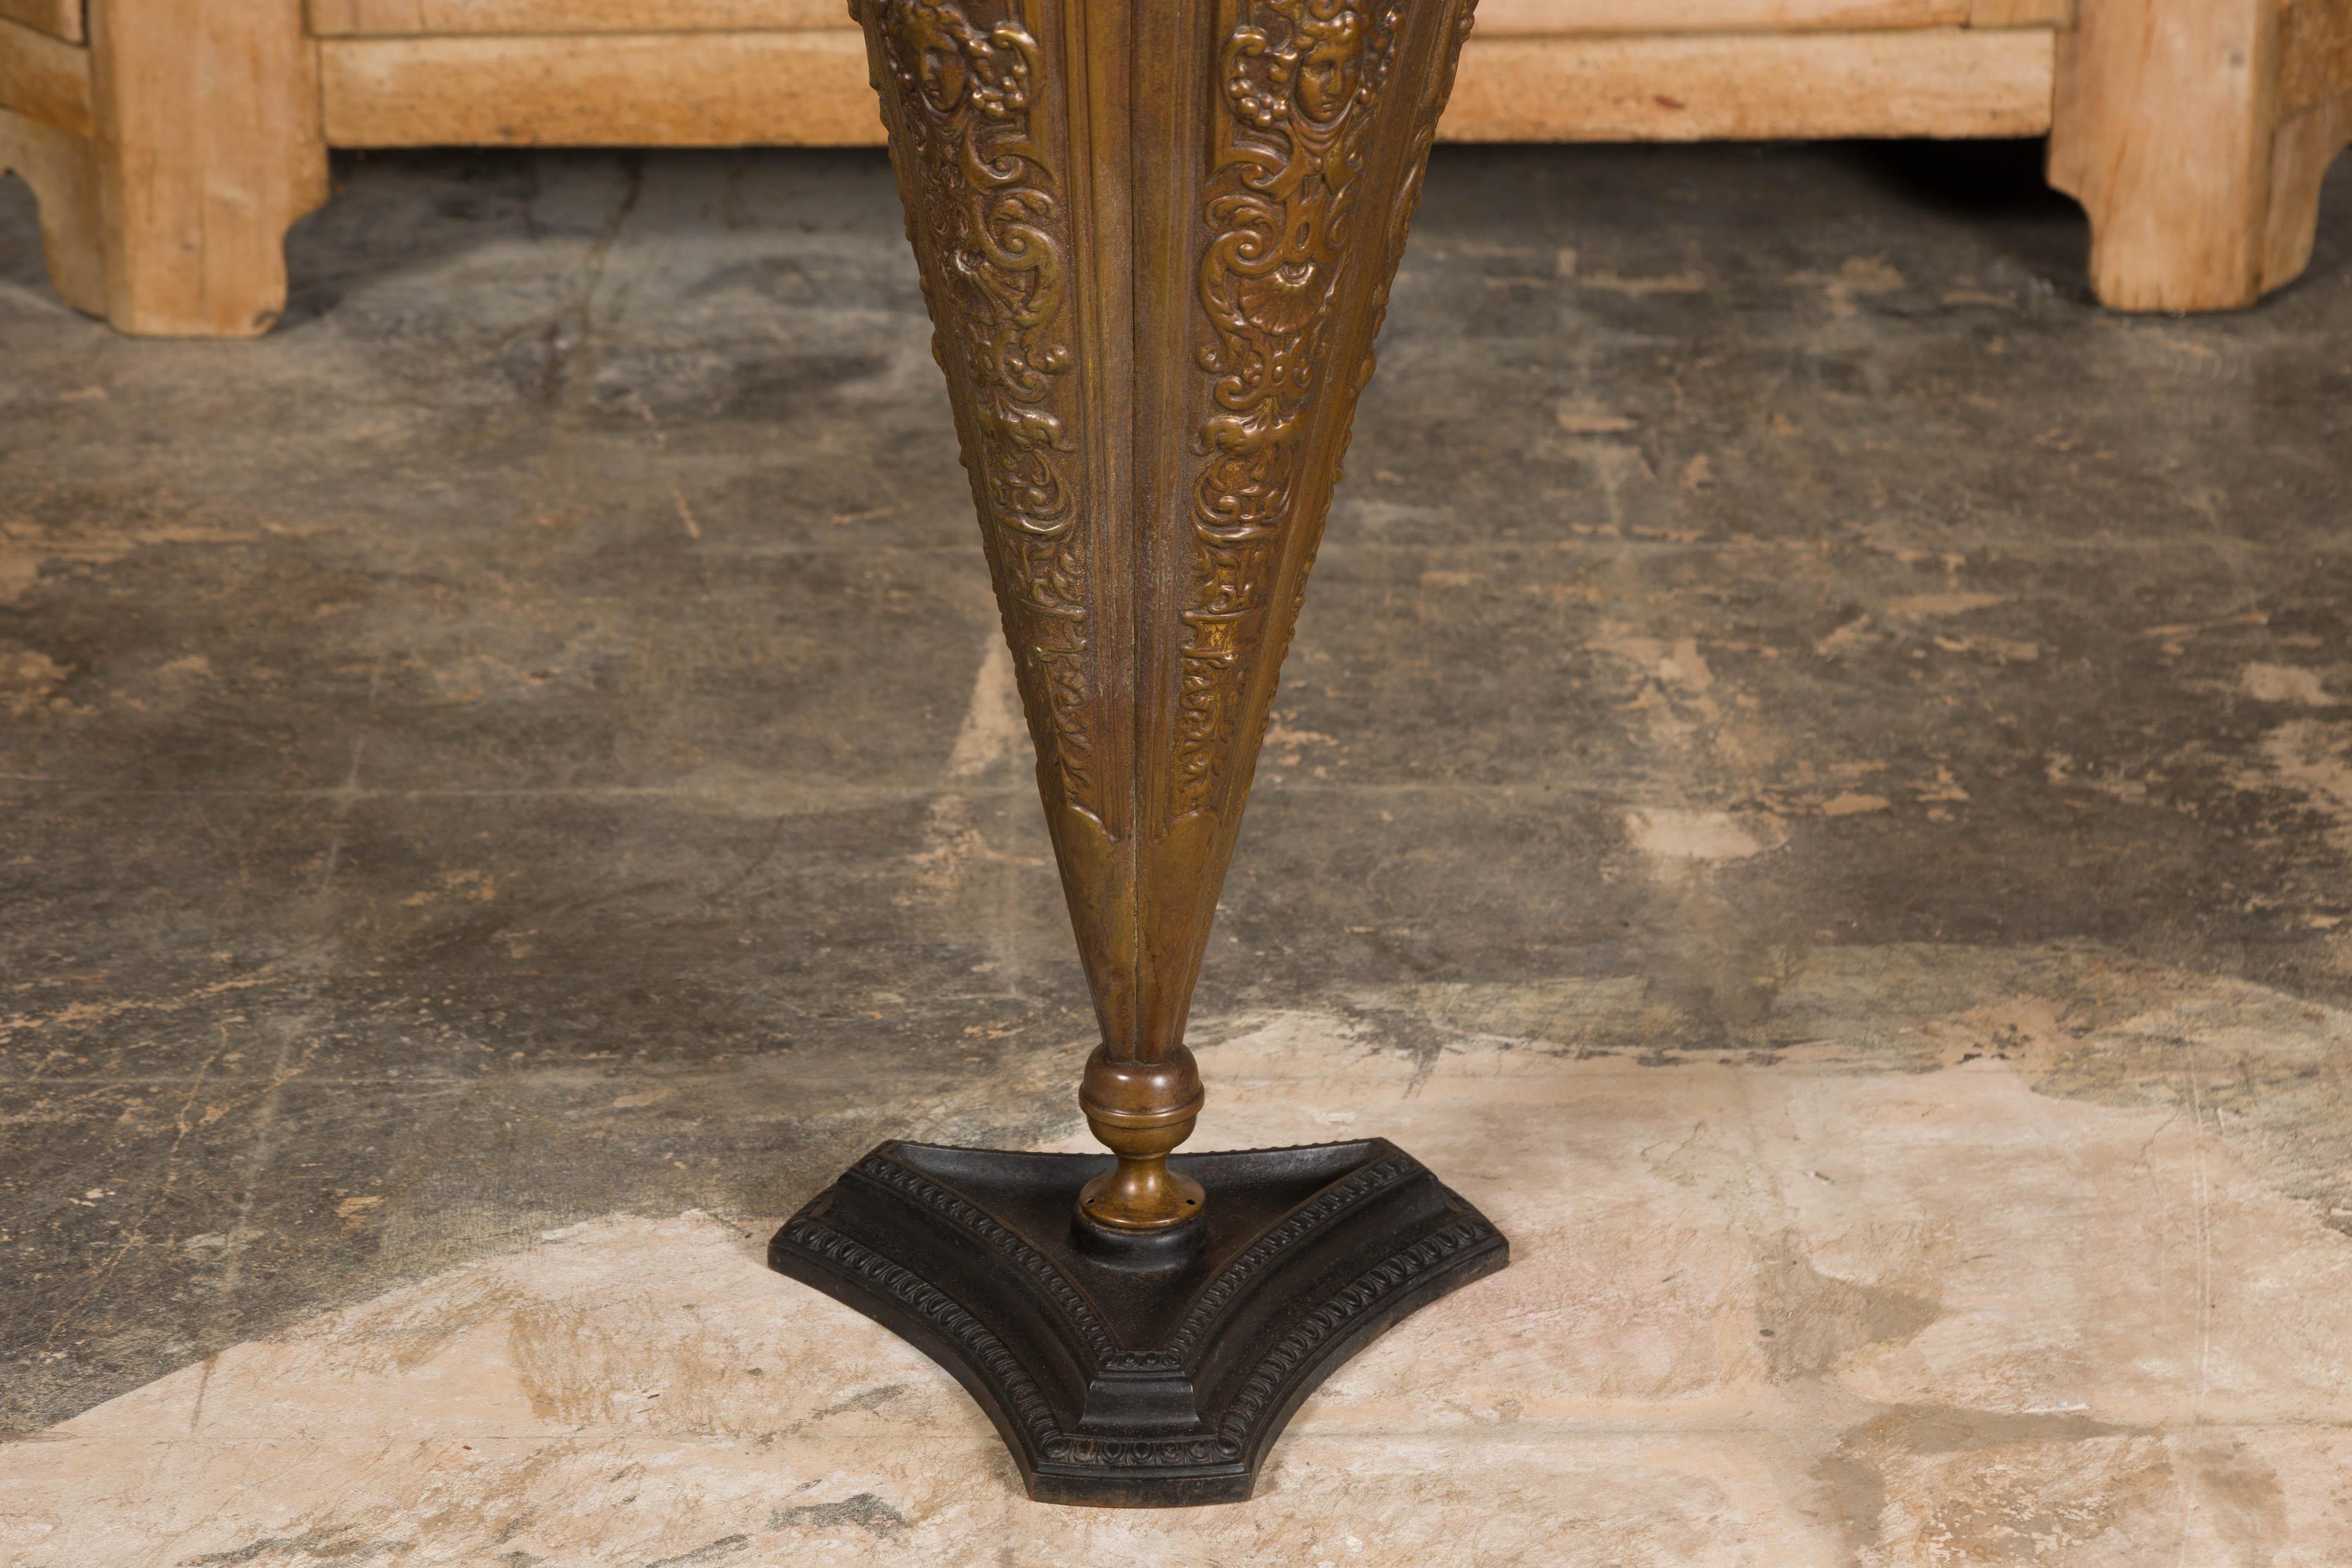 English 1920-1930 Brass Umbrella Stand with Raised Motifs and Tripartite Base For Sale 3